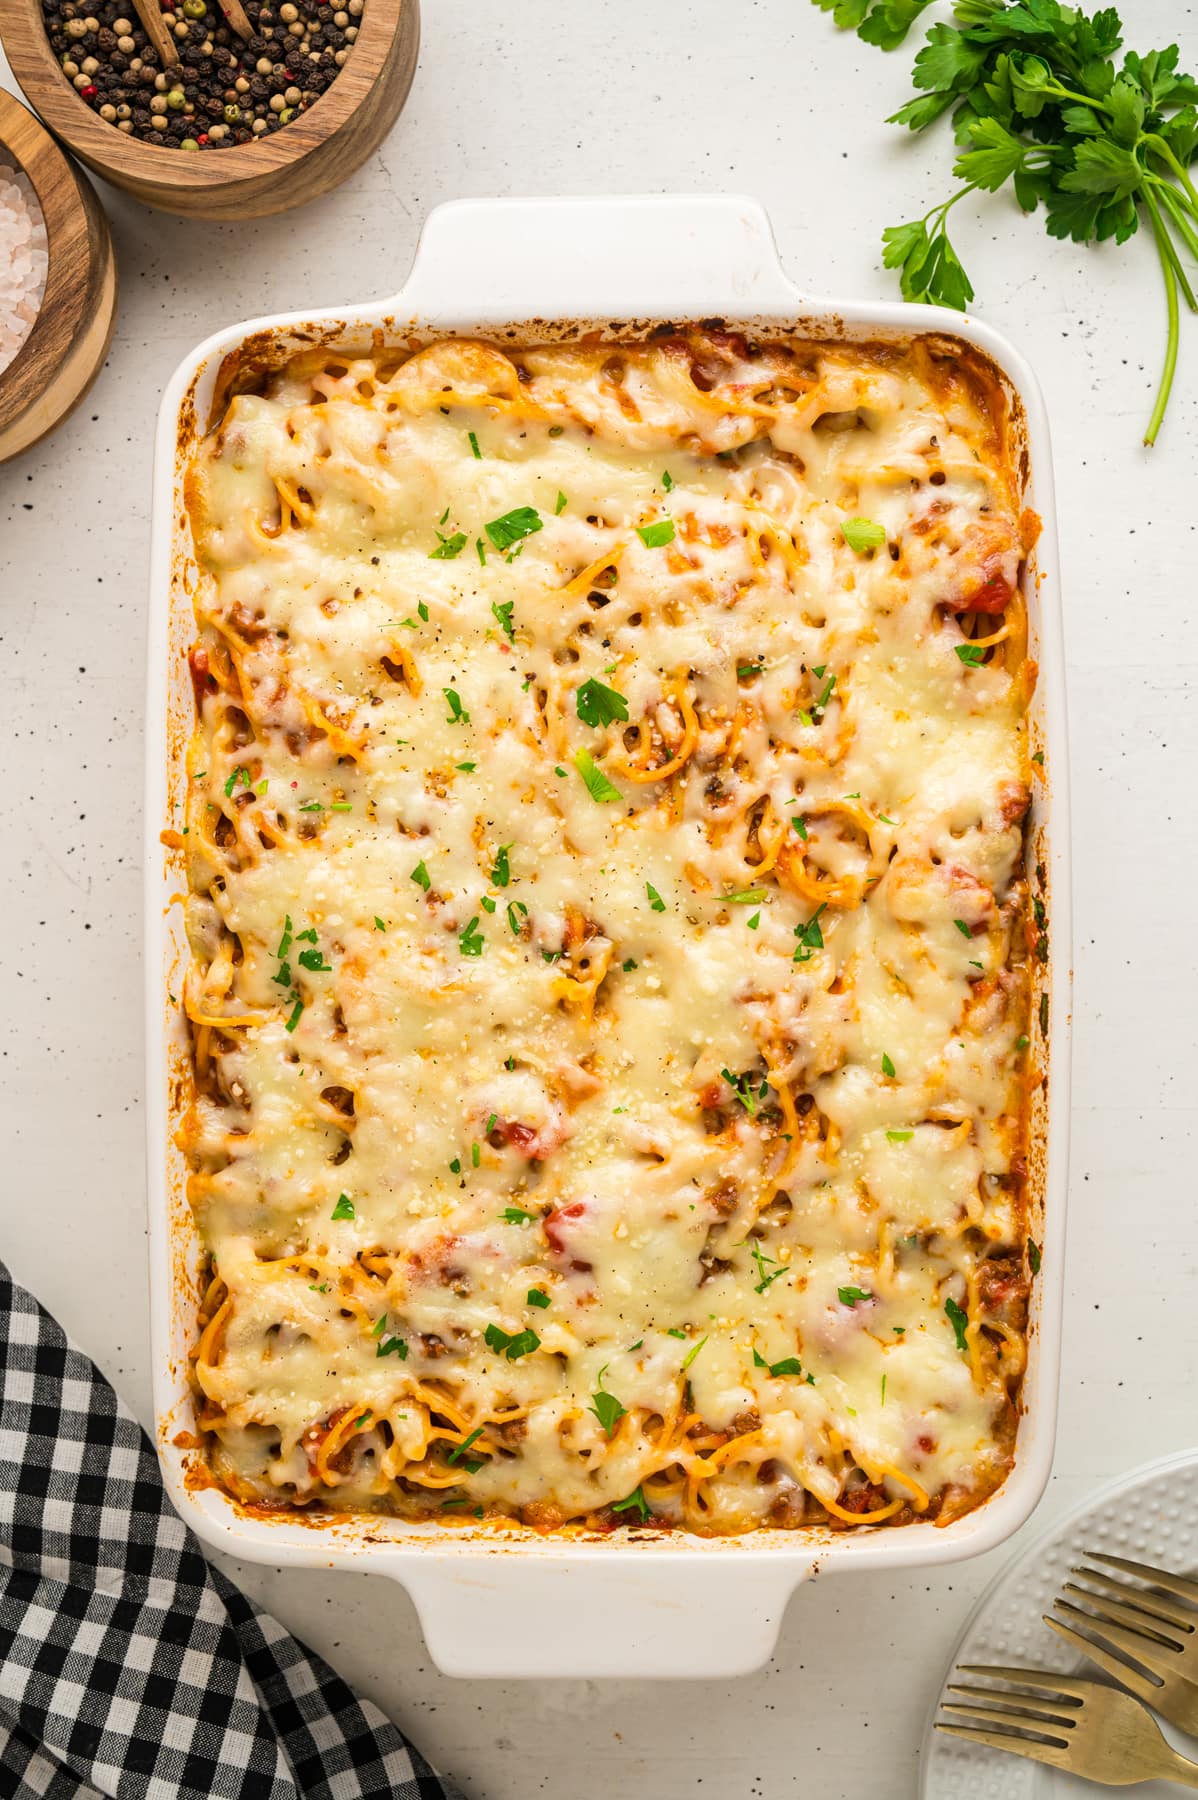 Overhead view of baked spaghetti casserole